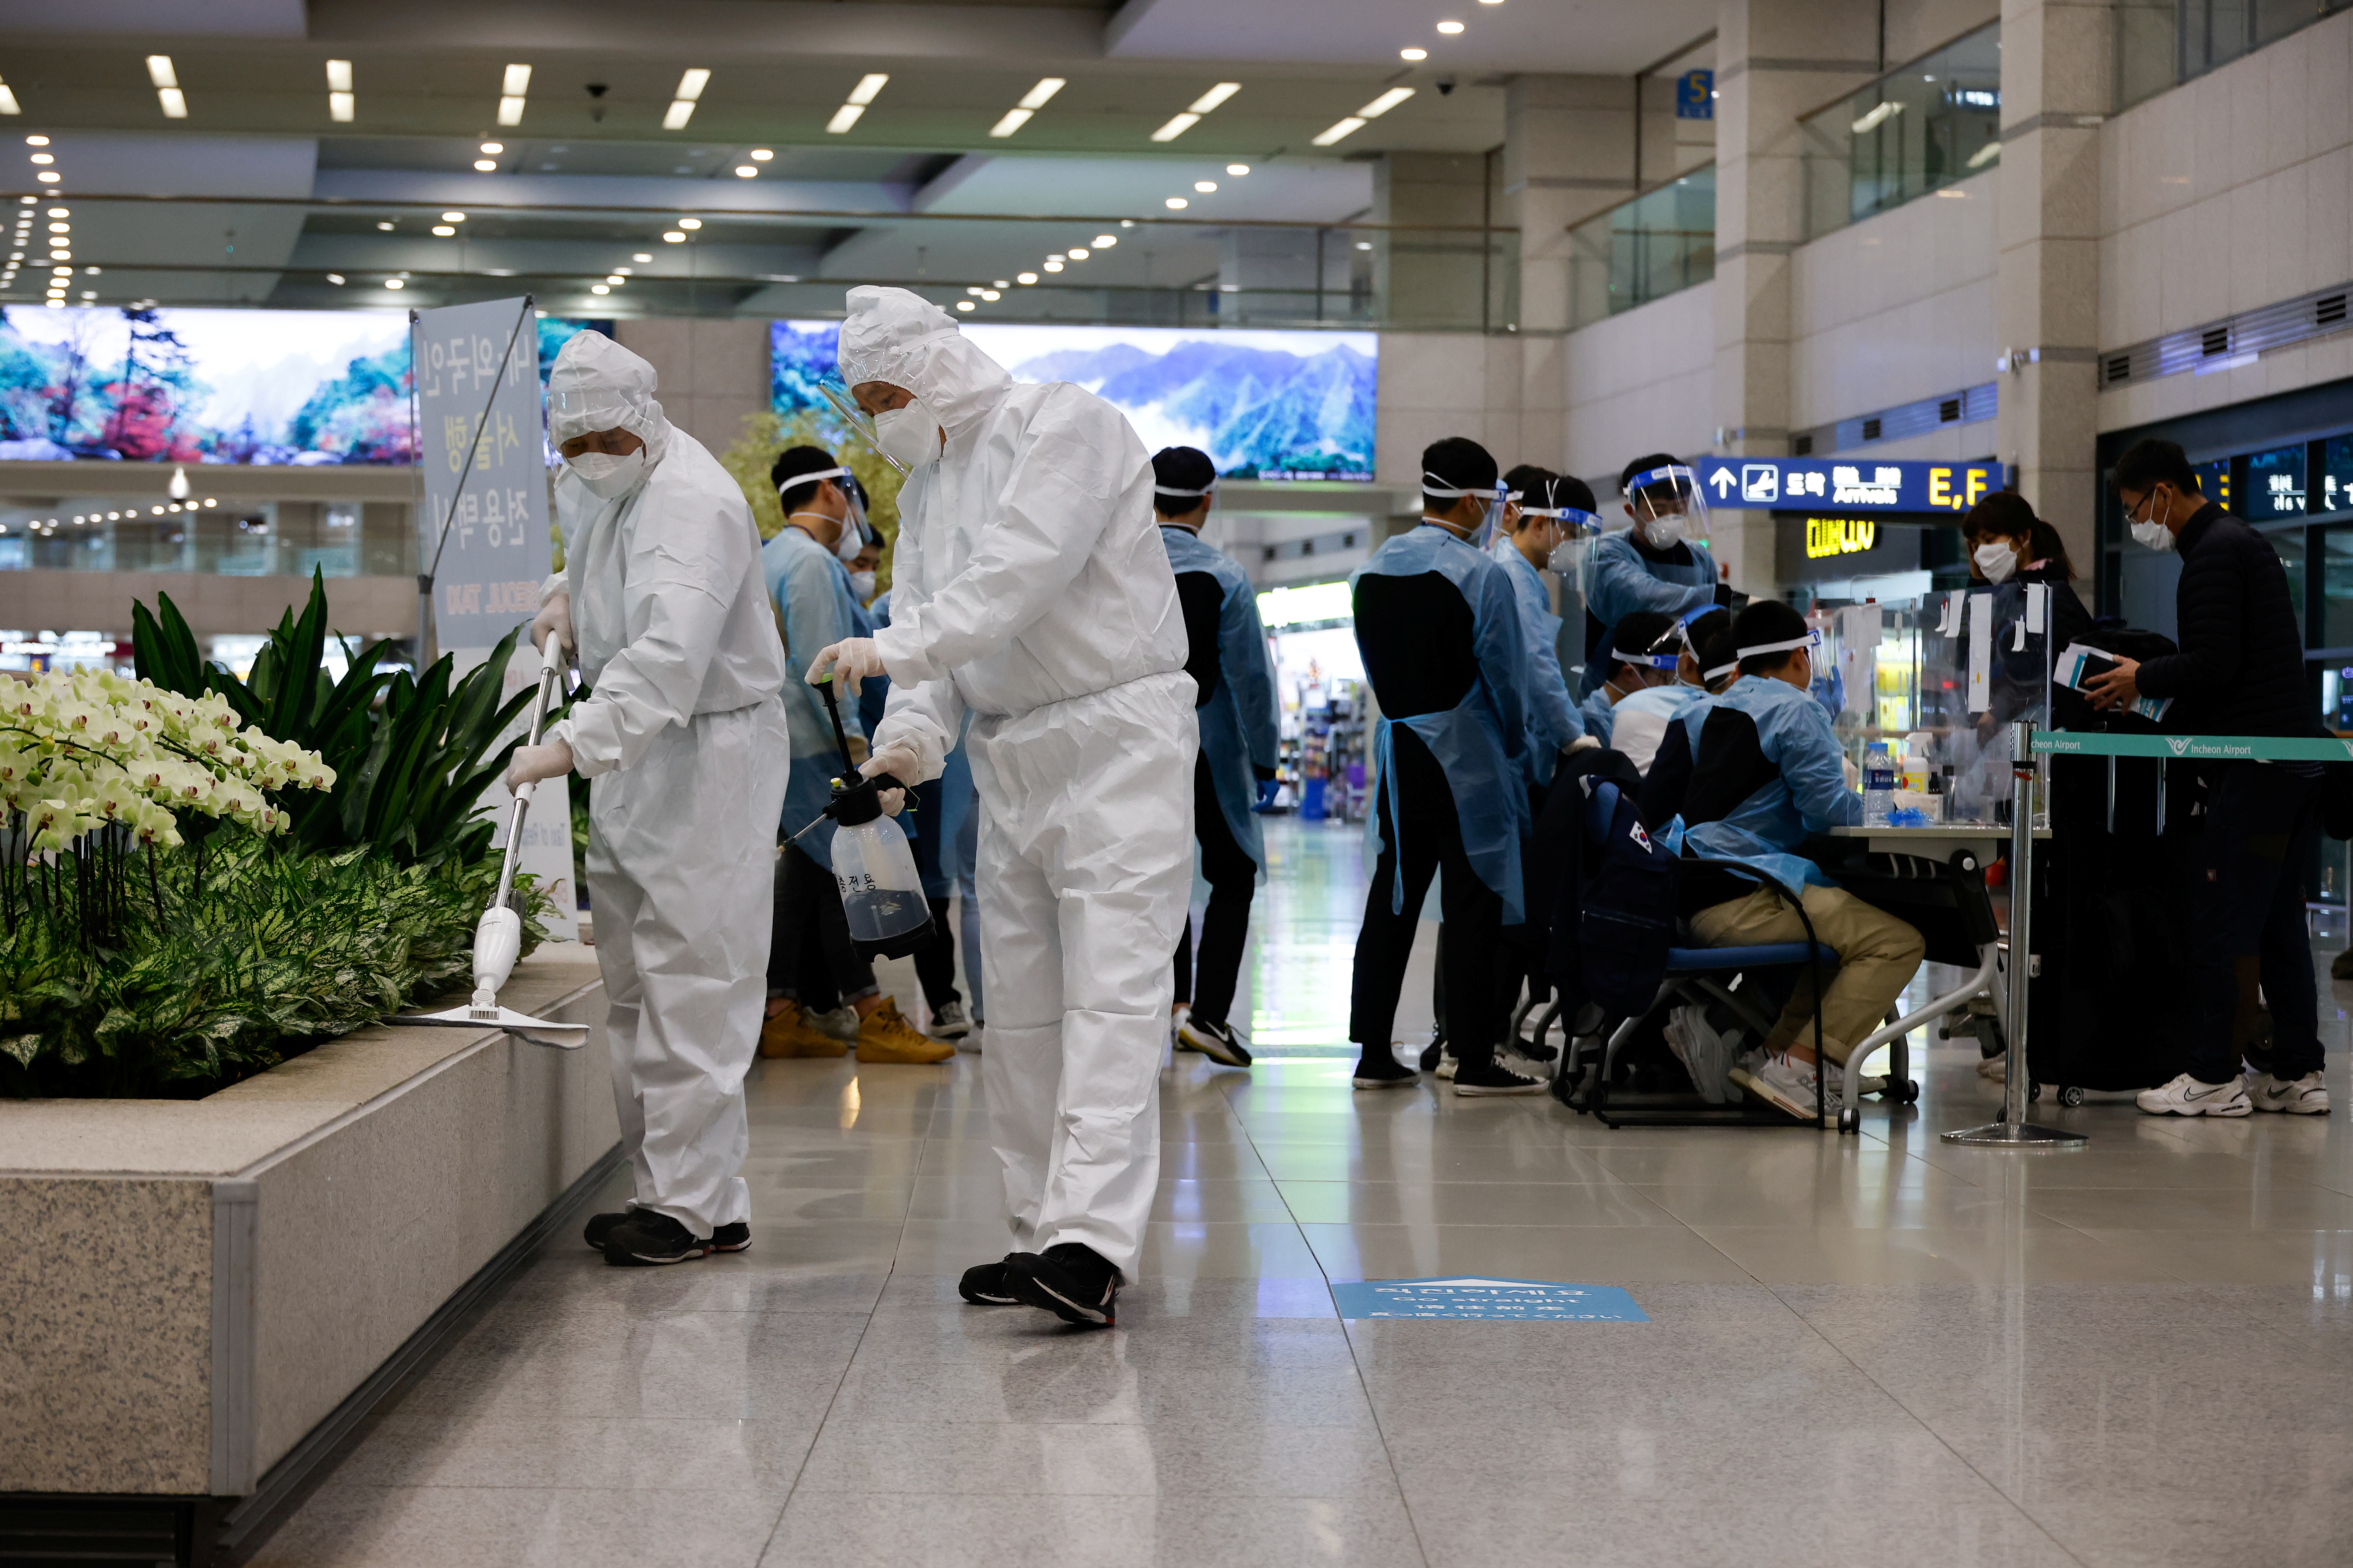 Workers wearing protective gear disinfect an arrival gate as other workers check passengers from overseas upon their arrival at the Incheon International Airport, in Incheon